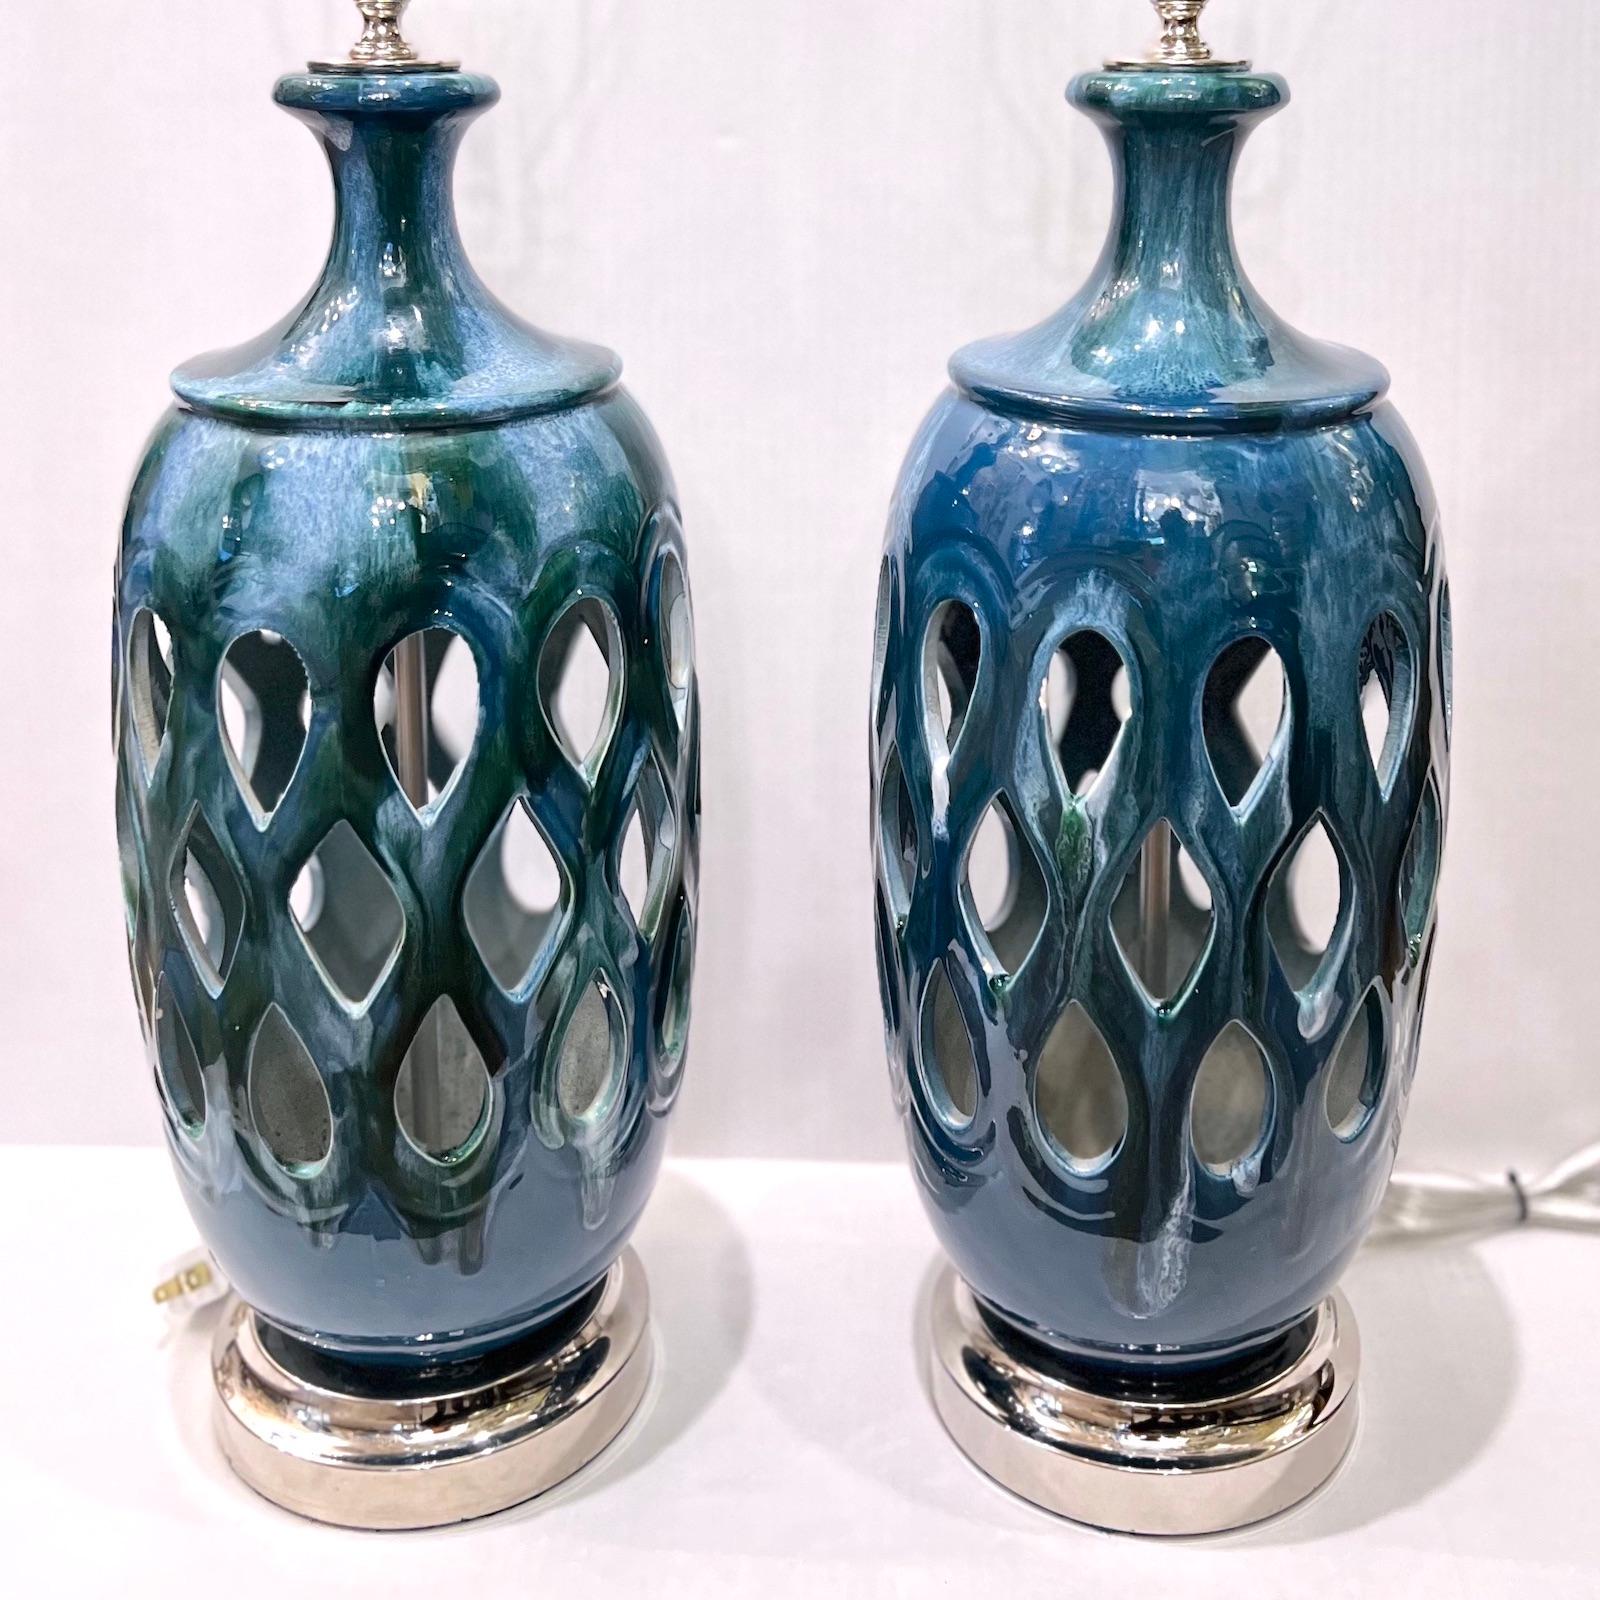 A pair of circa 1960s Italian pierced blue porcelain lamps with silver bases.

Measurements:
Height of body: 19.25